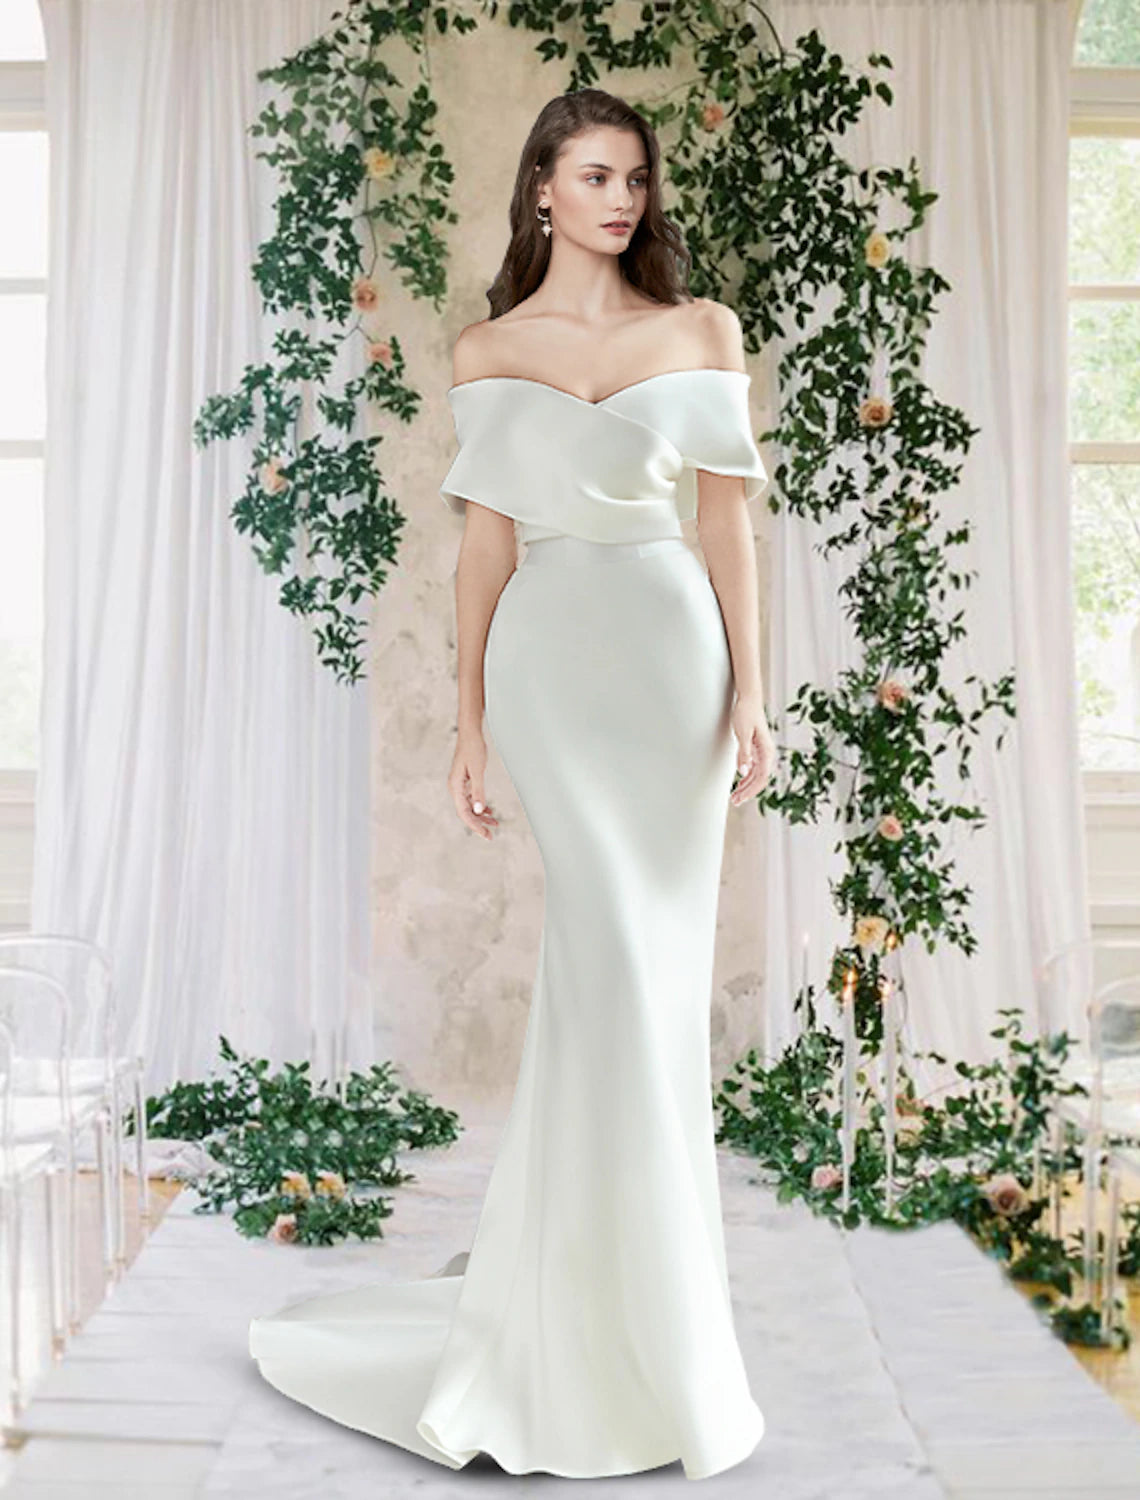 Hall Casual Wedding Dresses Sheath / Column Off Shoulder Cap Sleeve Chapel Train Satin Bridal Gowns With Ruched